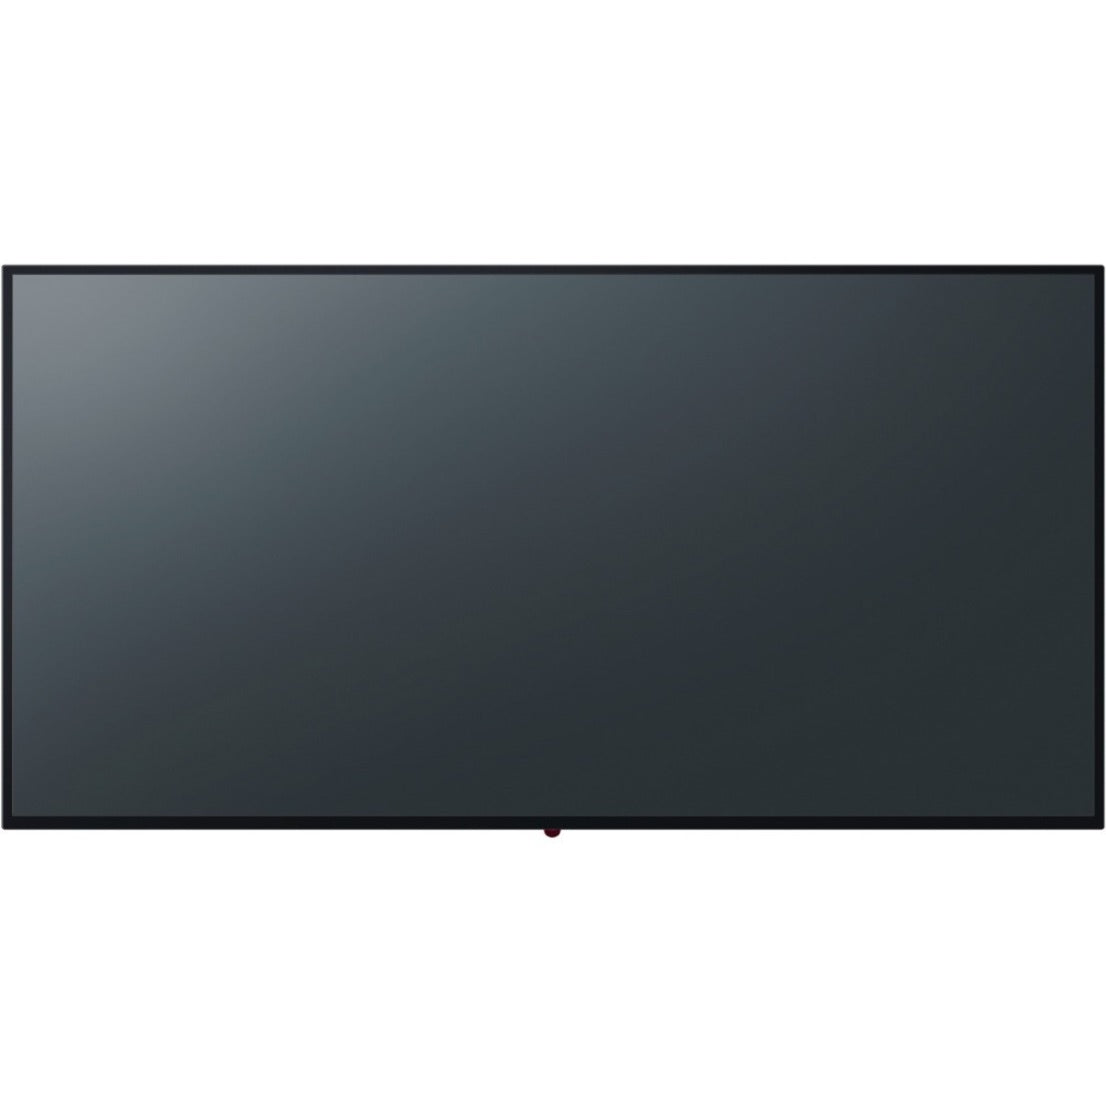 Panasonic 75" 4K LCD Display - Stunning Visuals for Your Digital Signage Needs (TH-75SQE1W)